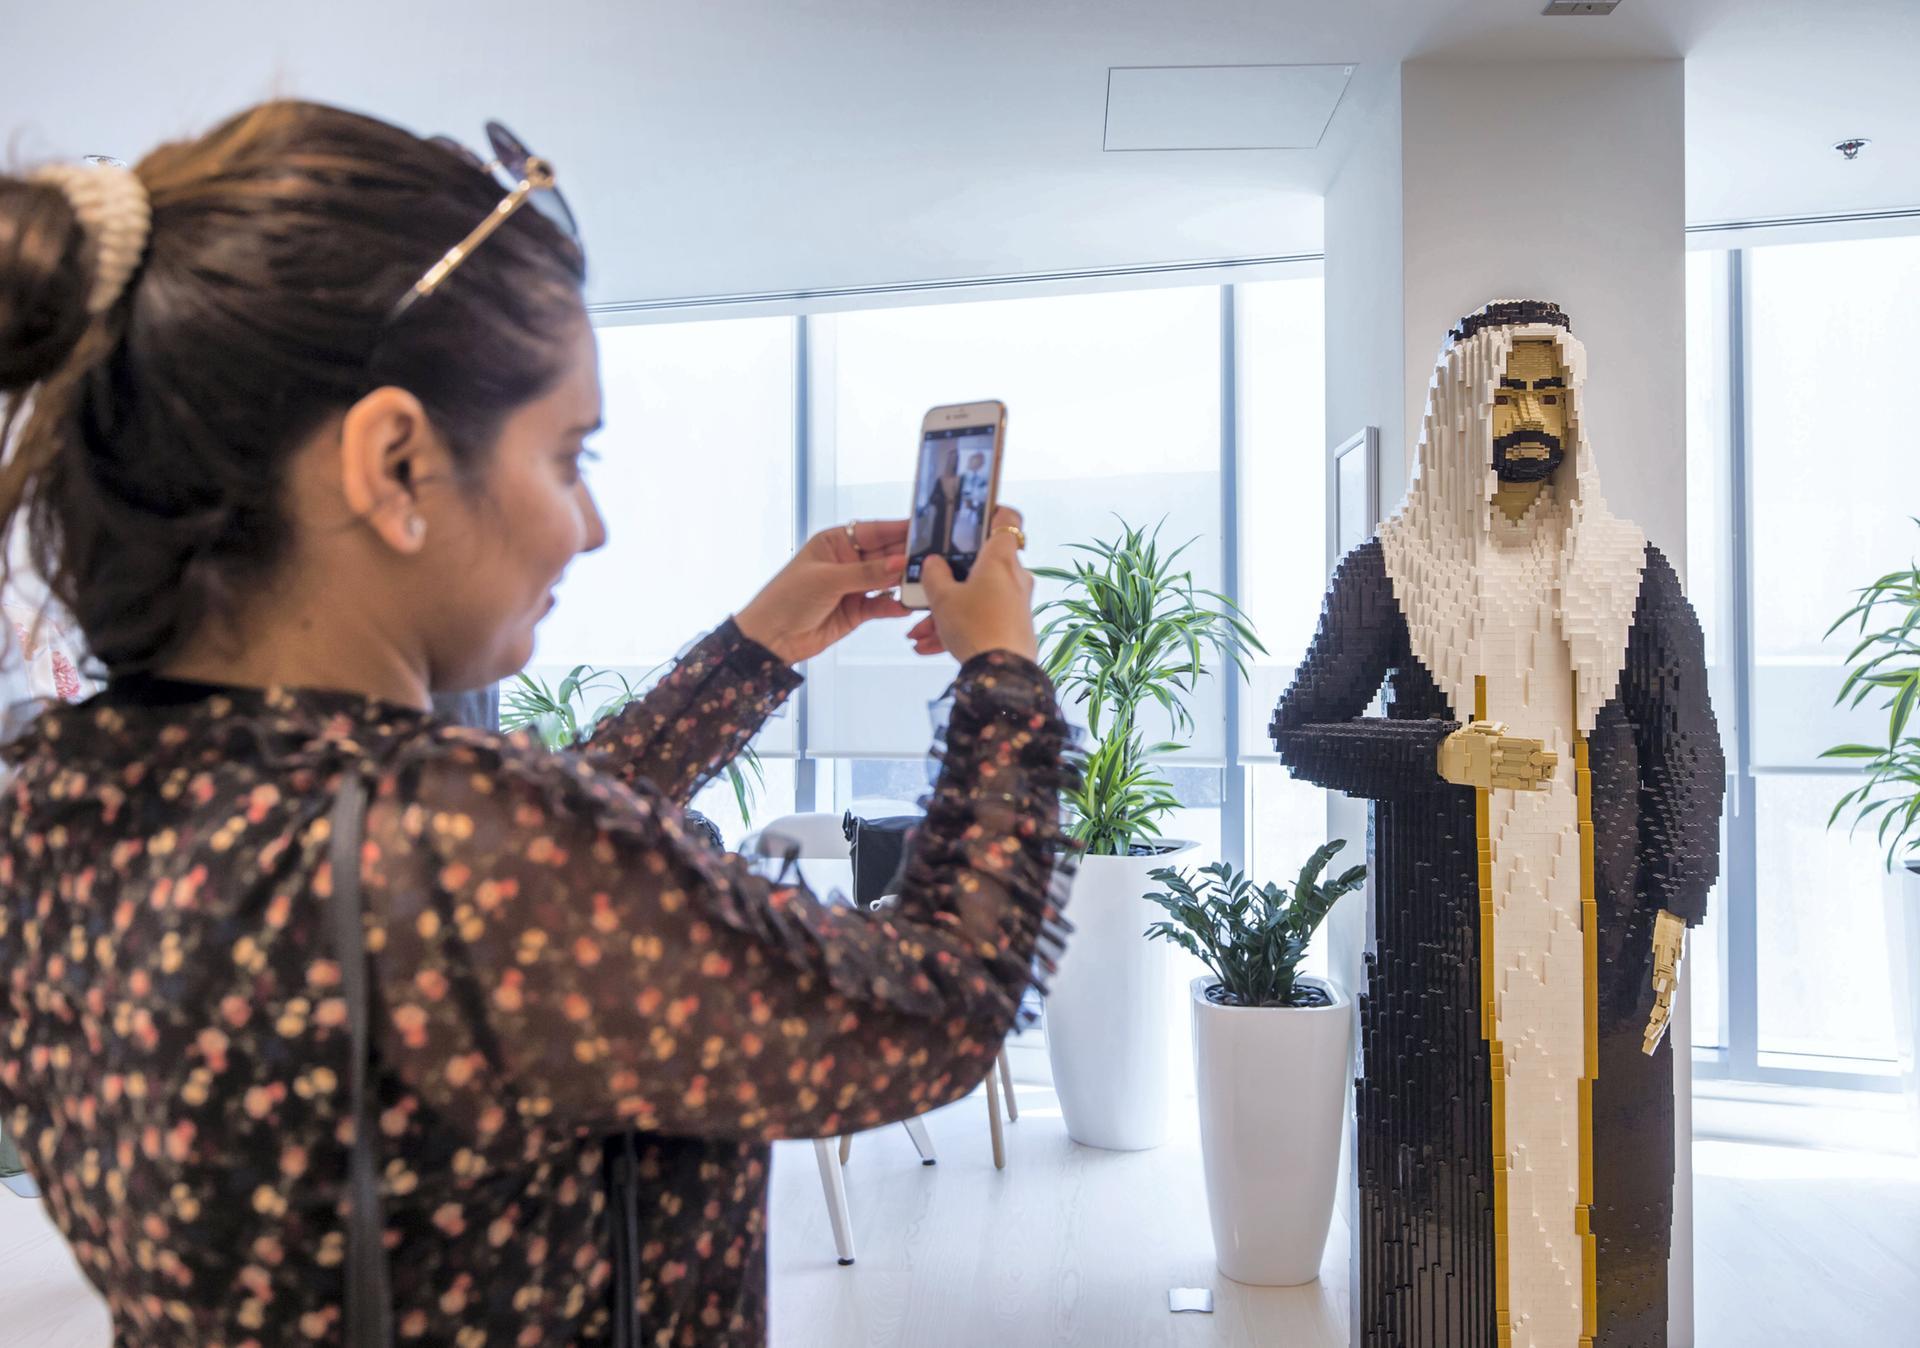 Everything is awesome inside Dubai's new Lego office